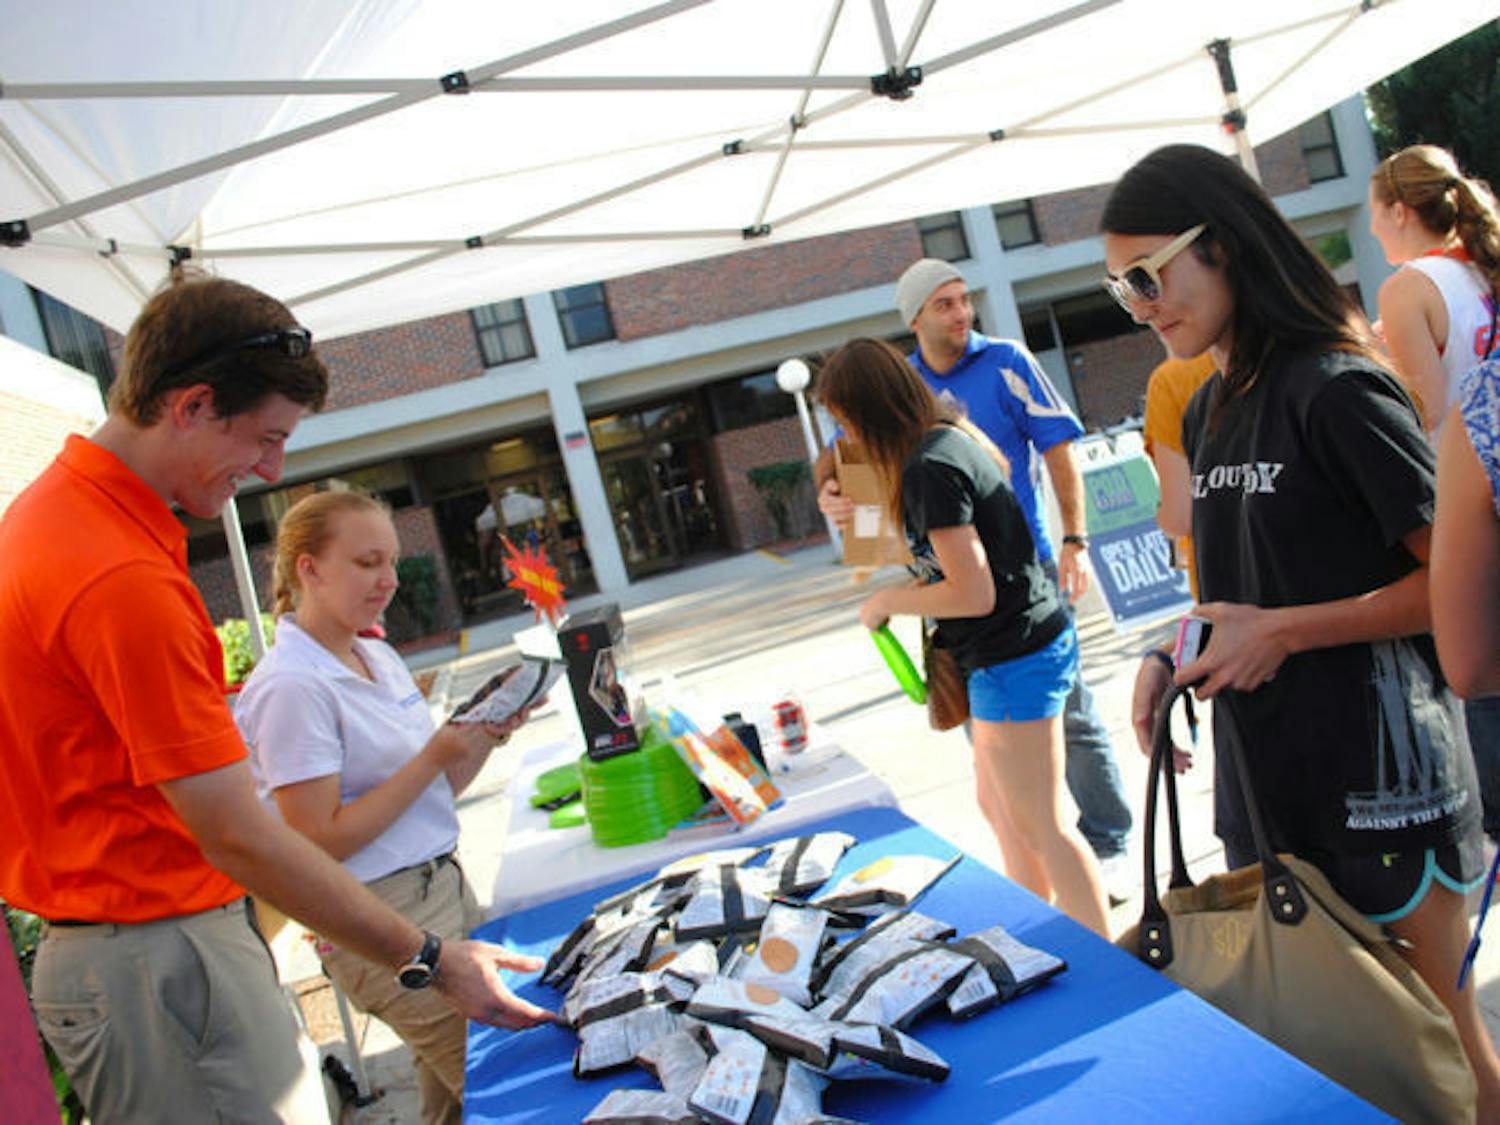 The P.O.D. Market at Beaty Towers welcomed students for games, prizes and sampling for its grand opening Thursday afternoon.